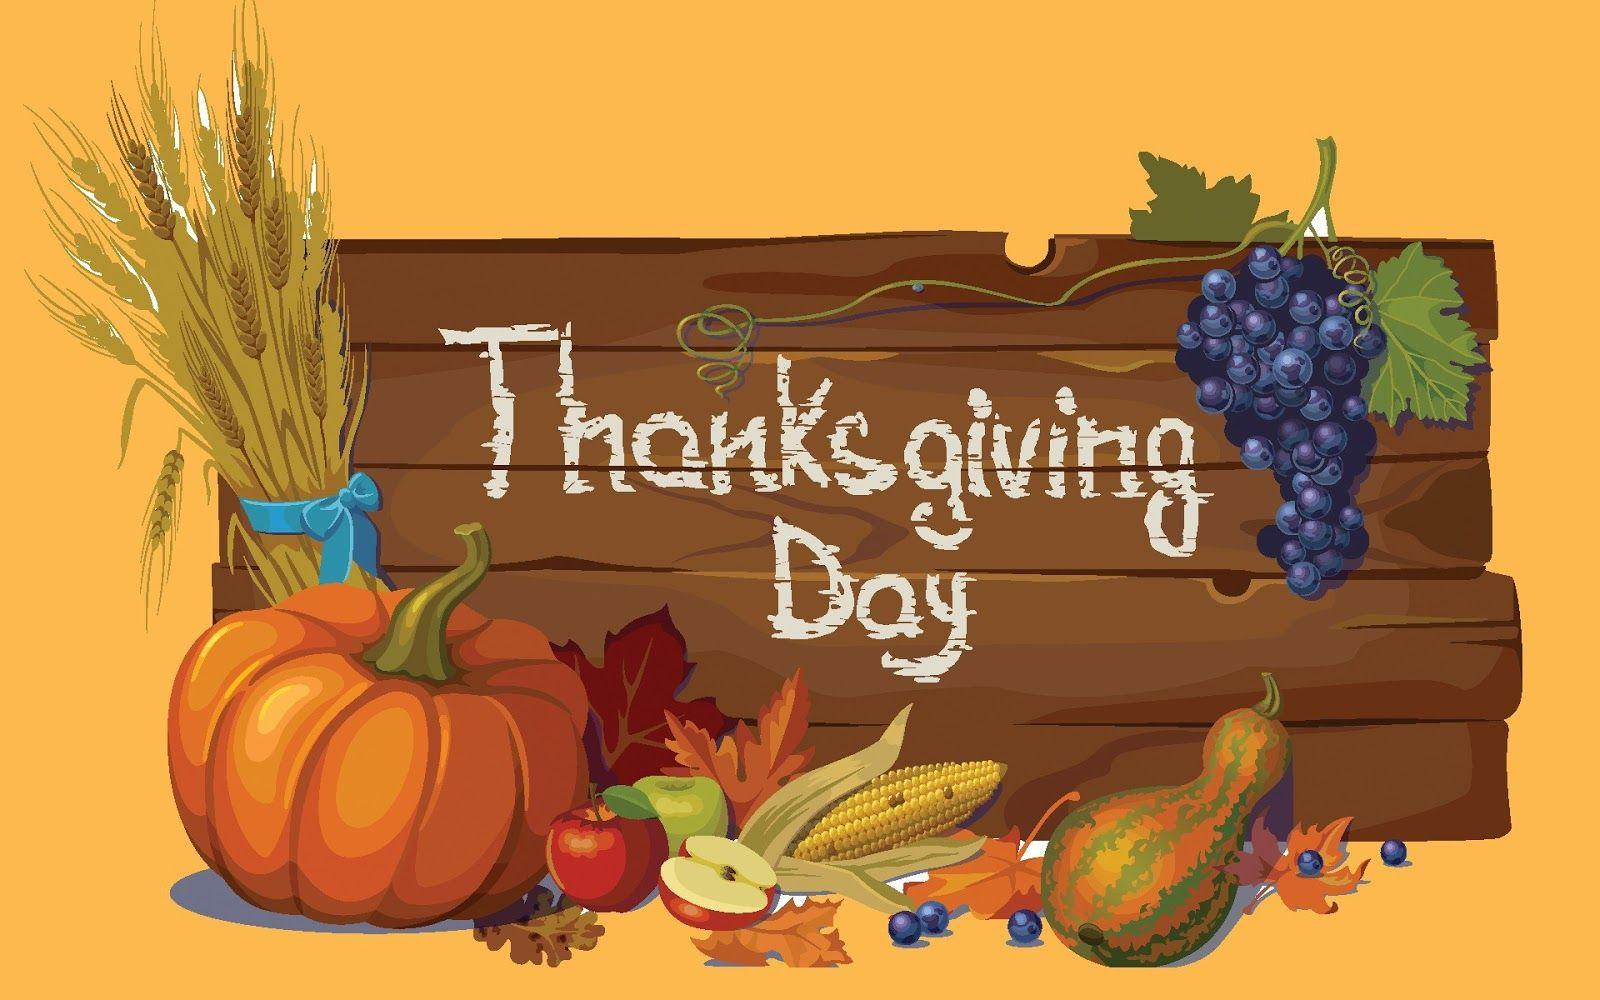 Happy Thanksgiving 2018 Quotes, Image, Picture, Wishes & Messages